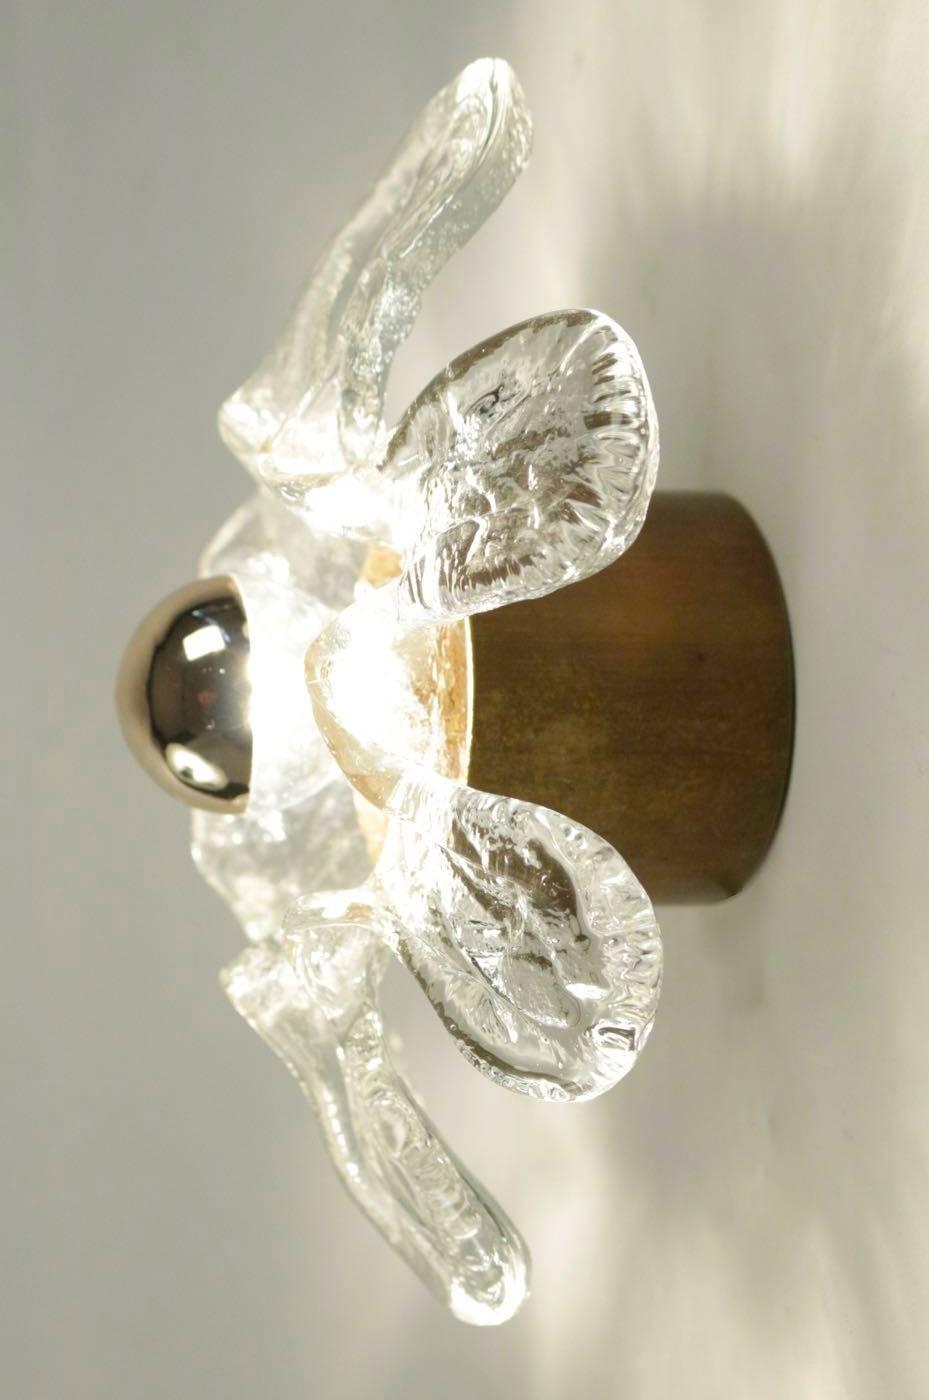 1960s set of four Murano glass flowers and brass sconces.

Each sconce consists of a Murano glass flower with seven petals with a bulb at his centre.
The back plate is made of brass cylinder.

One bulb per sconce.